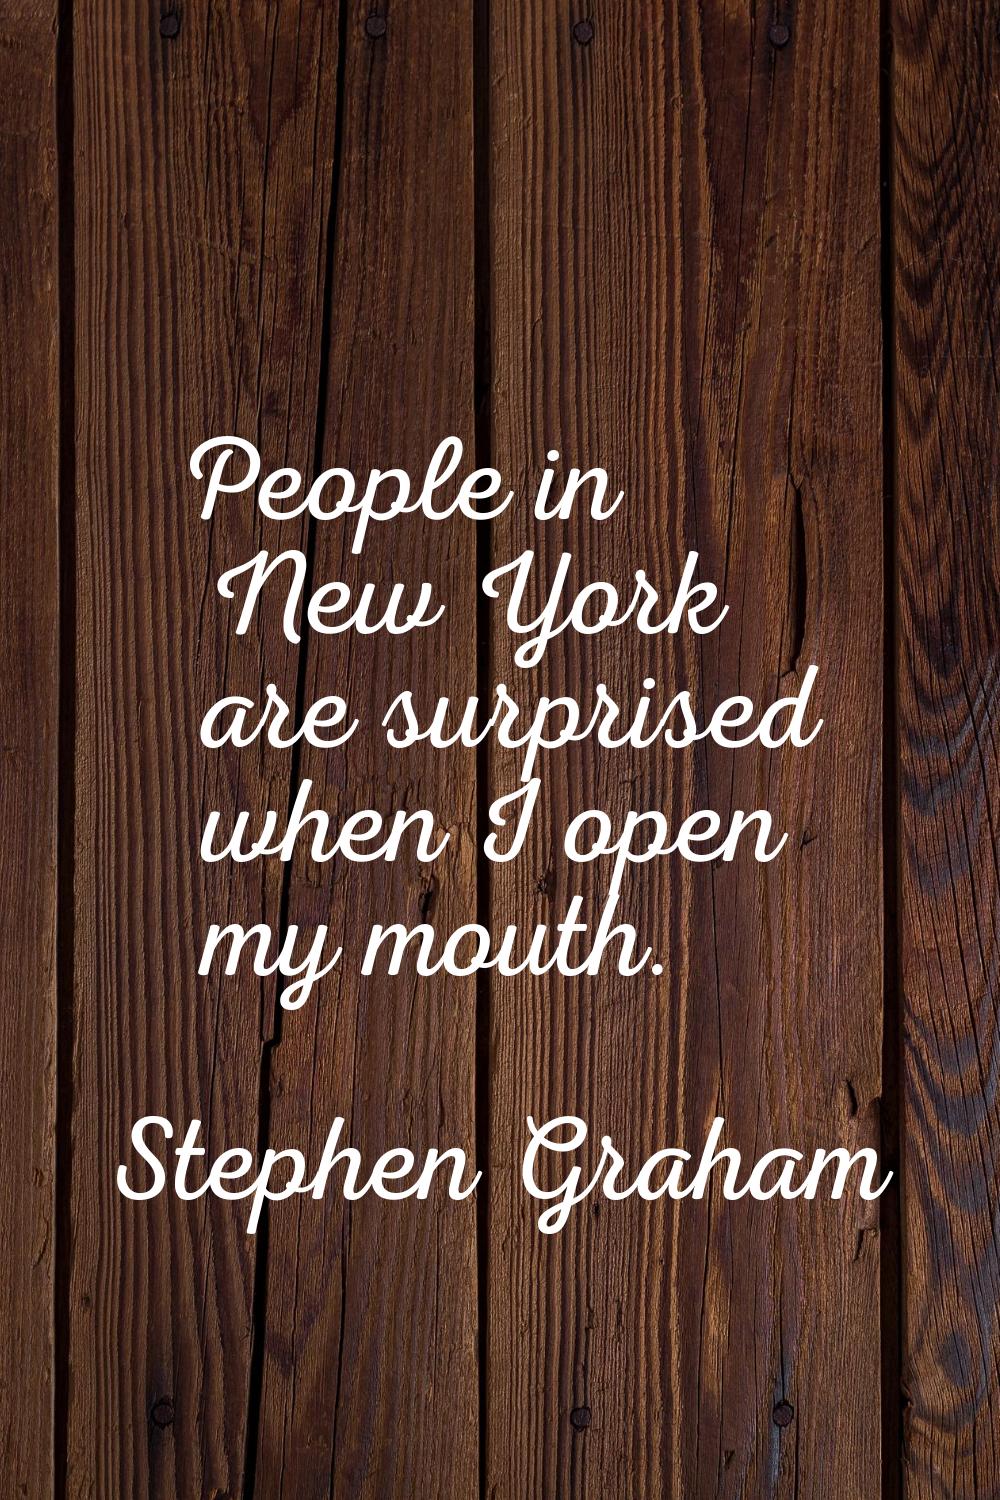 People in New York are surprised when I open my mouth.